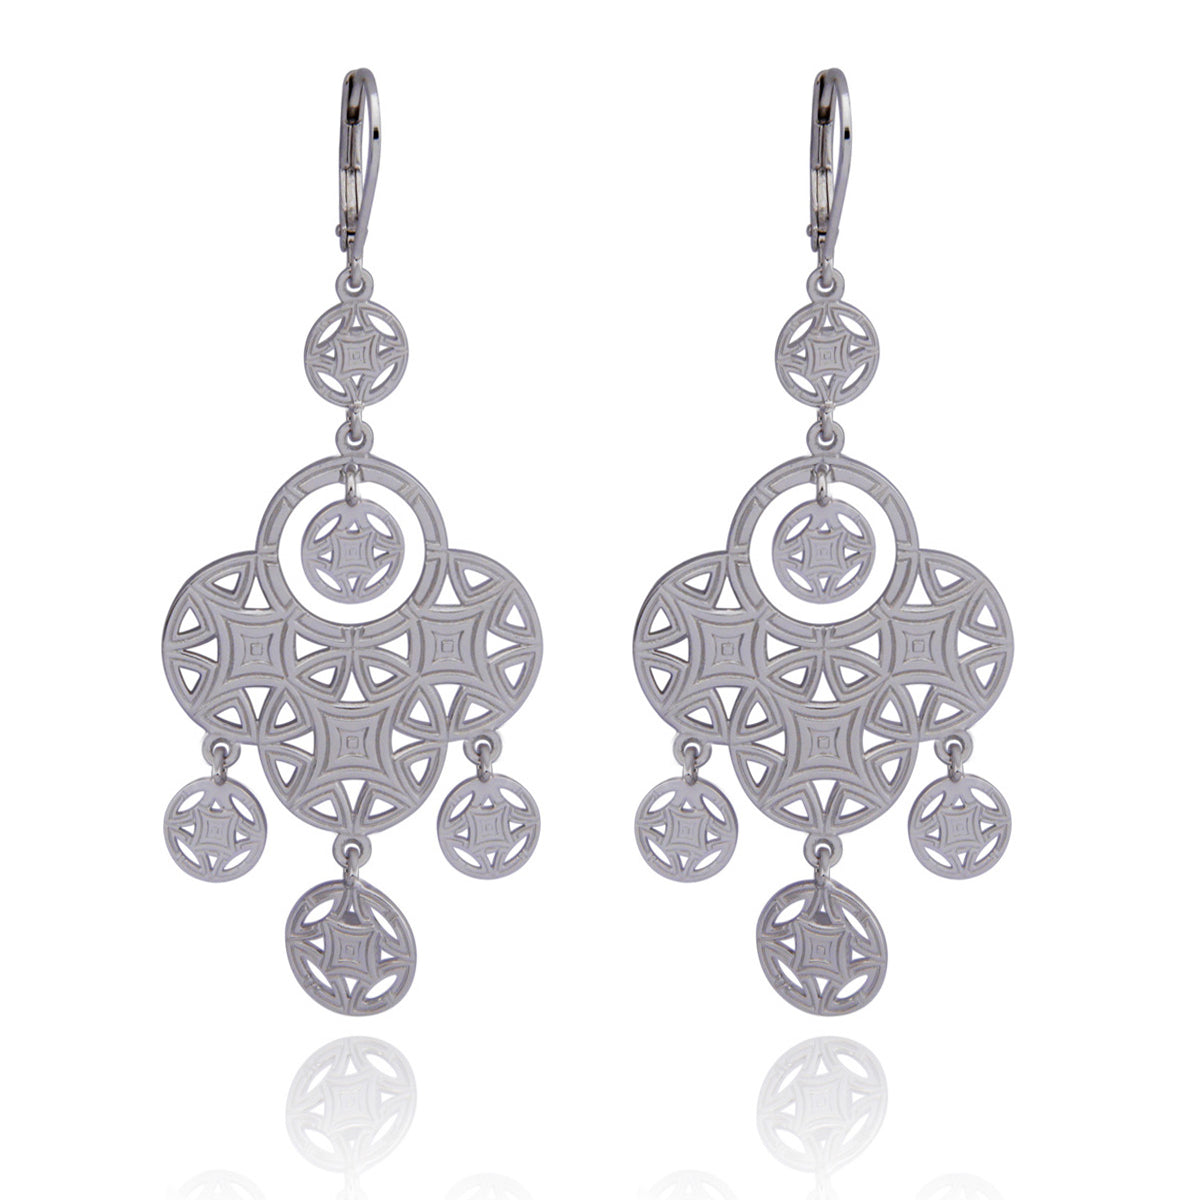 REFLECTIONS - Leverback Sterling Silver Dangly Earrings